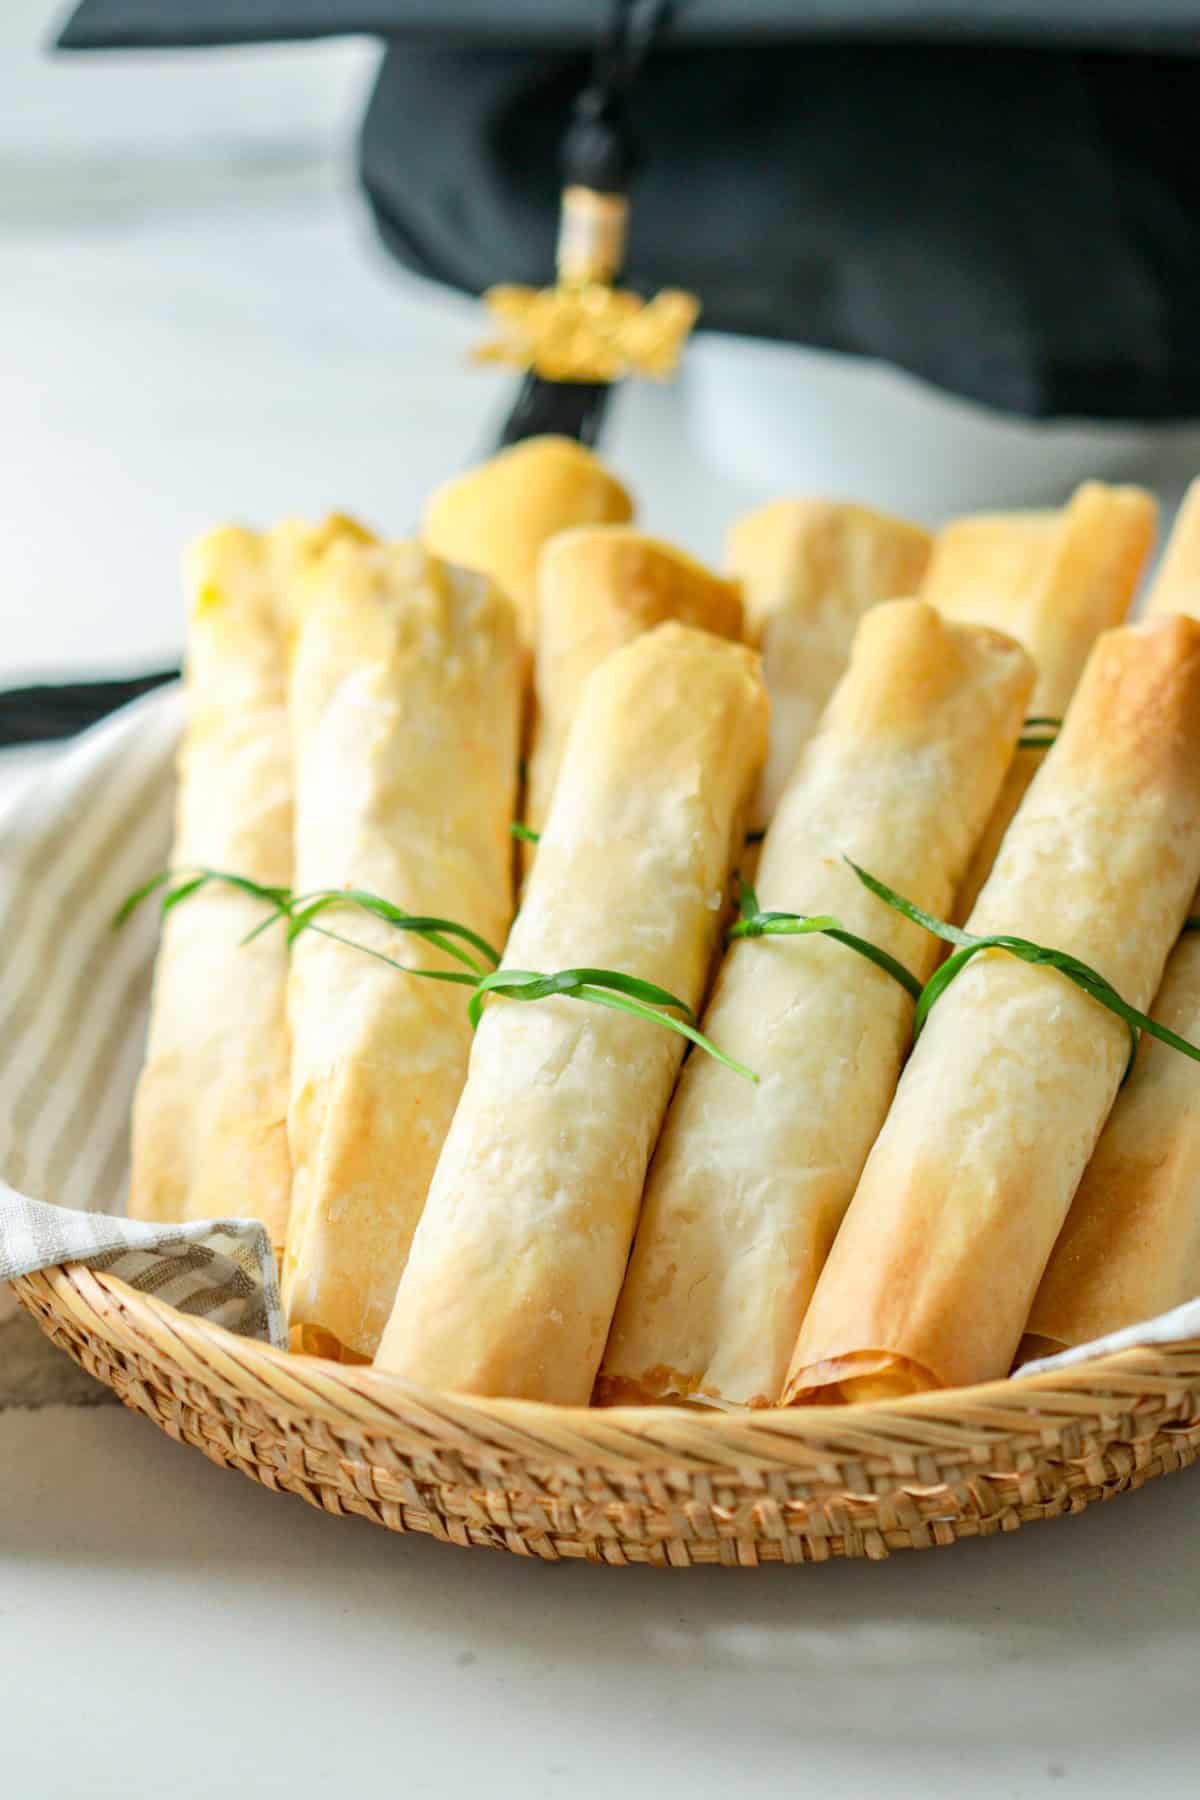 Phyllo dough diplomas rolled and stuffed with feta cheese in a basket.